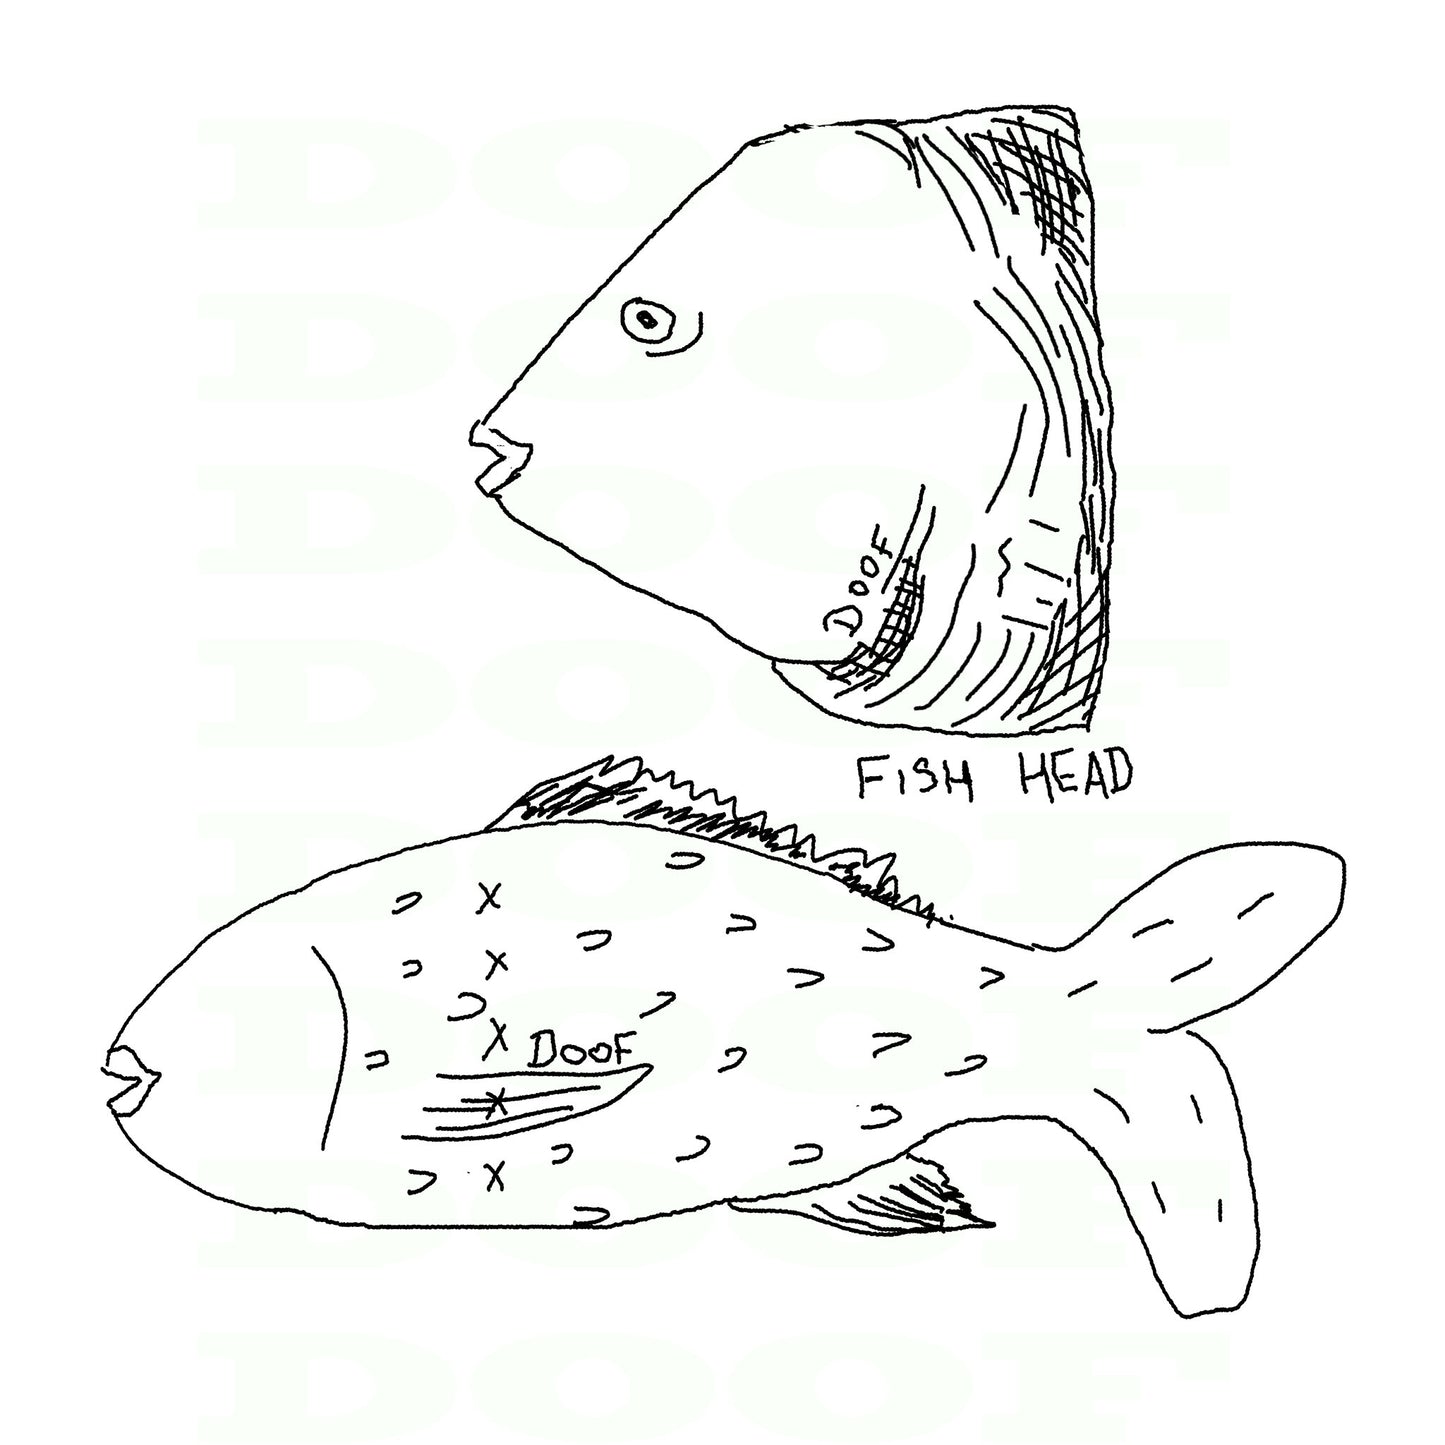 Fish Heads (for soups, curries, cat meals)